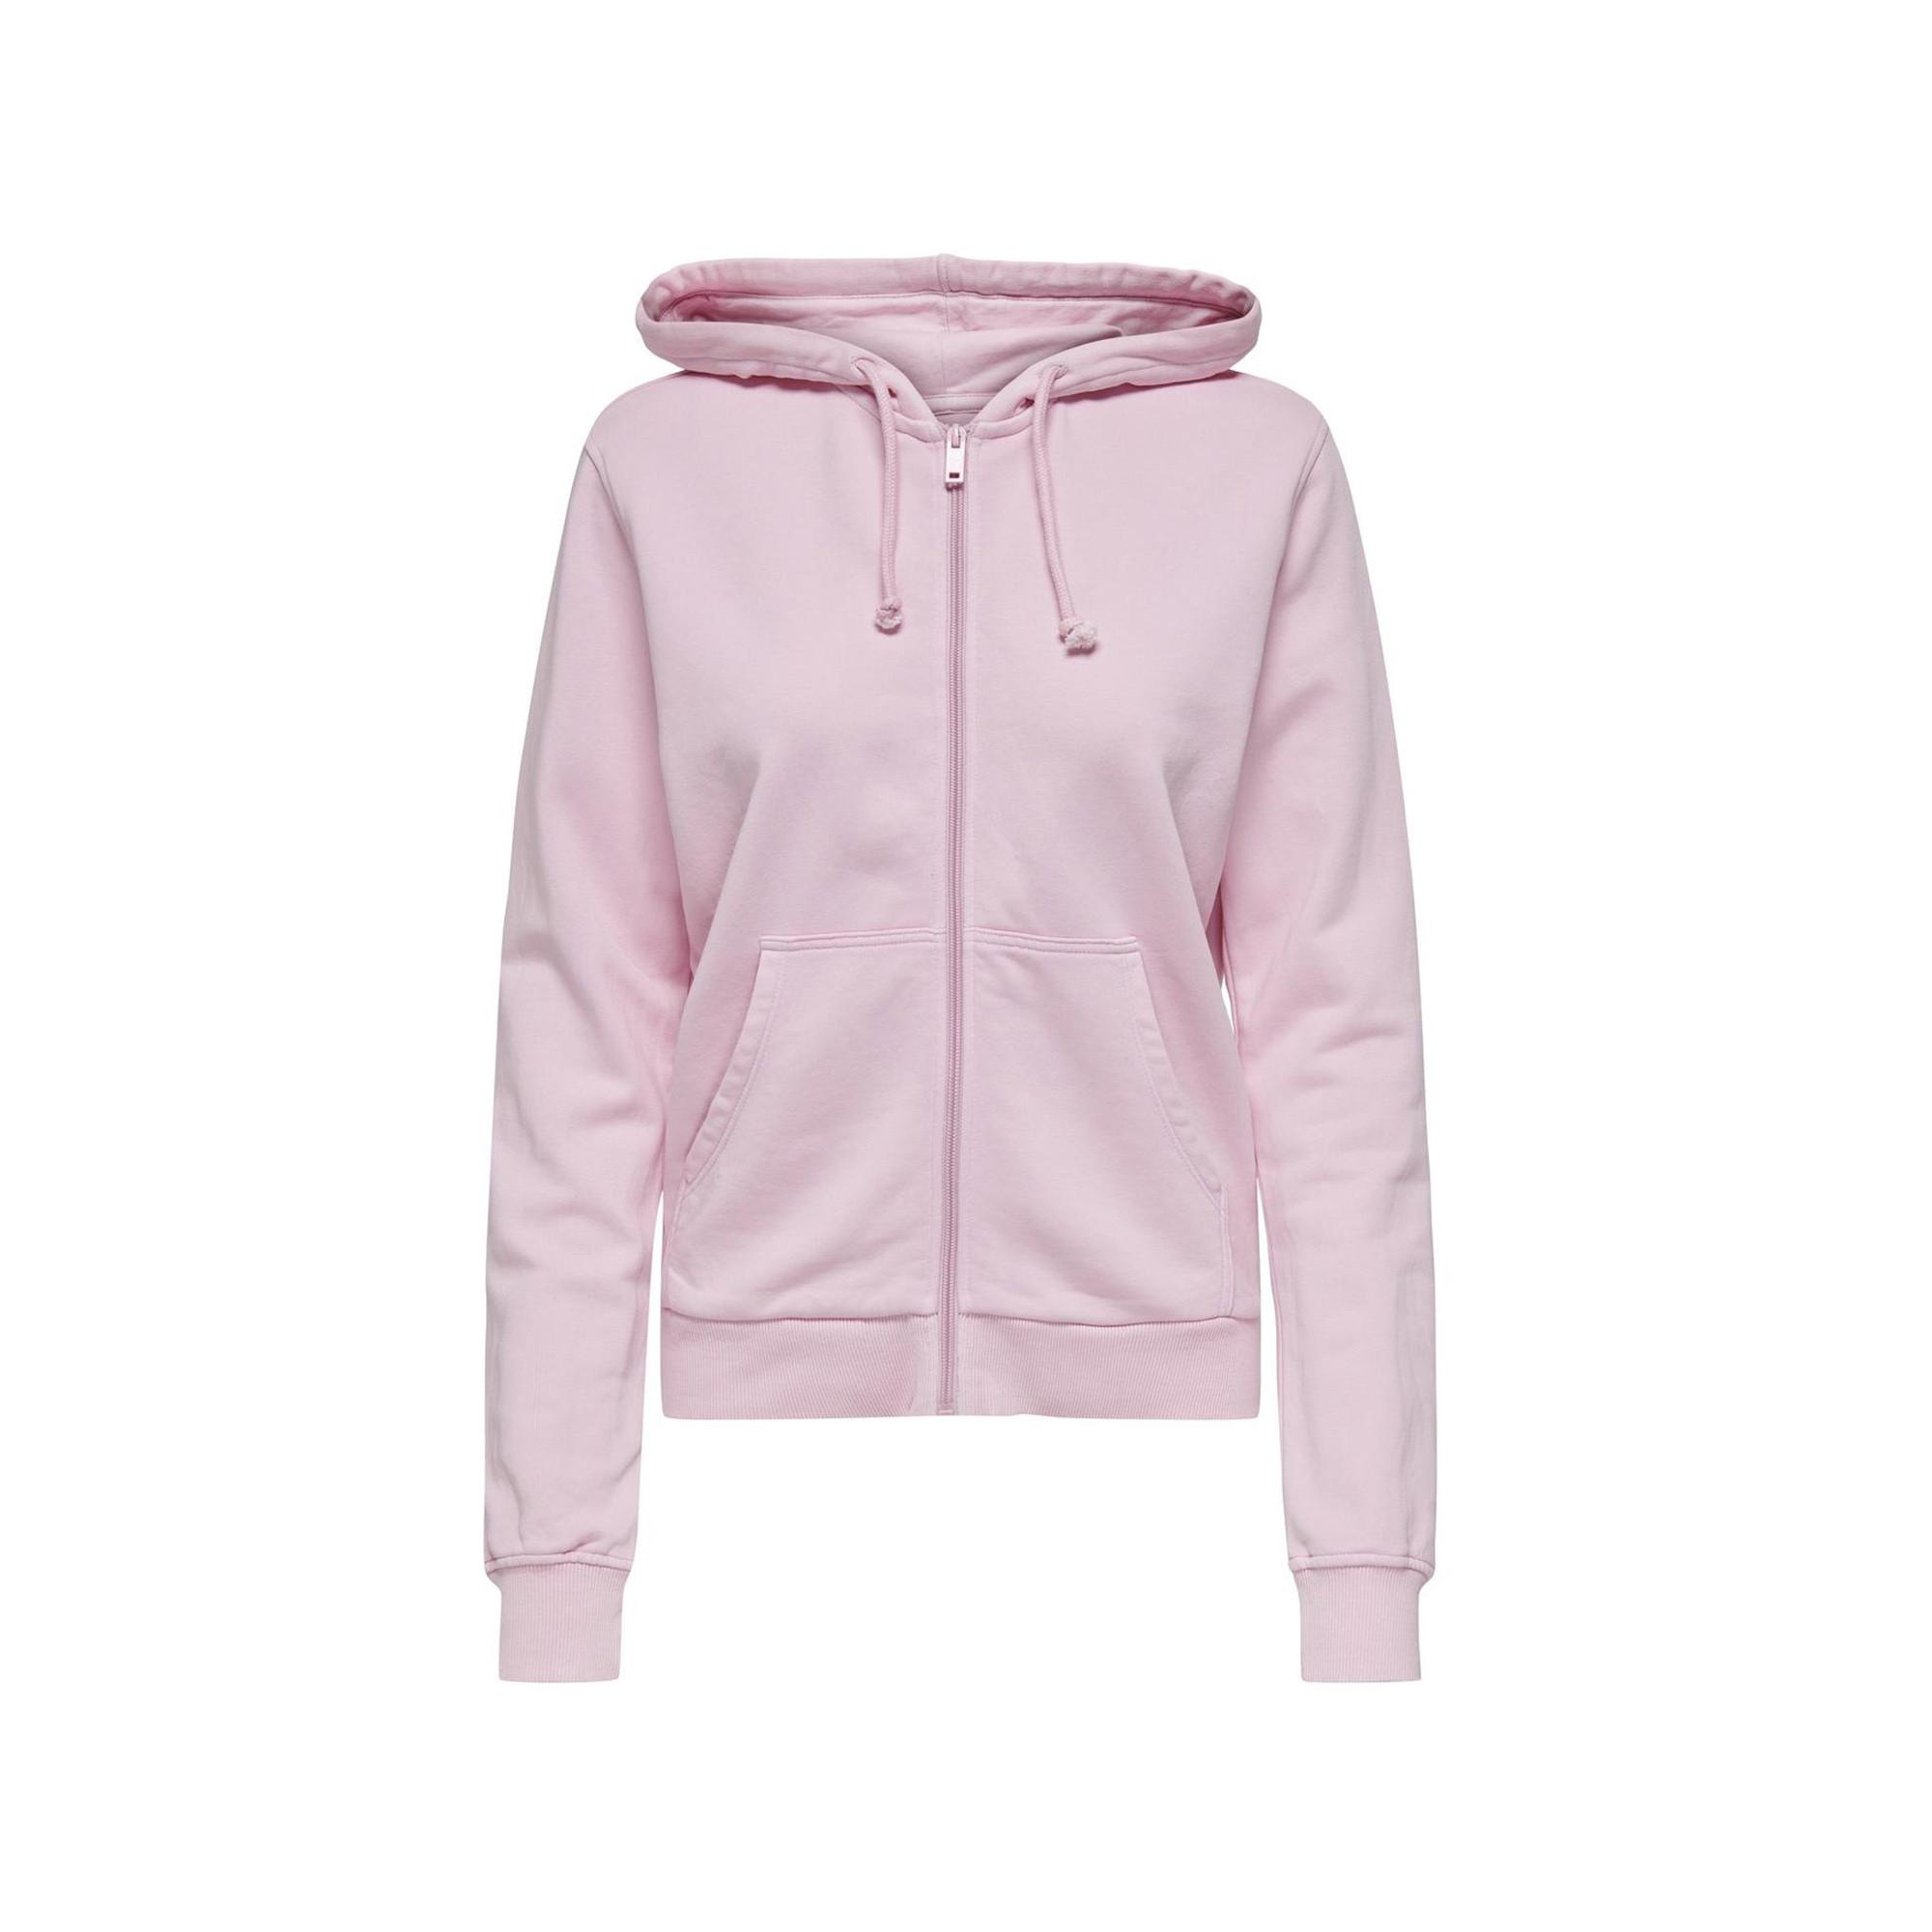 Only Lingerie Allison Hoodie 